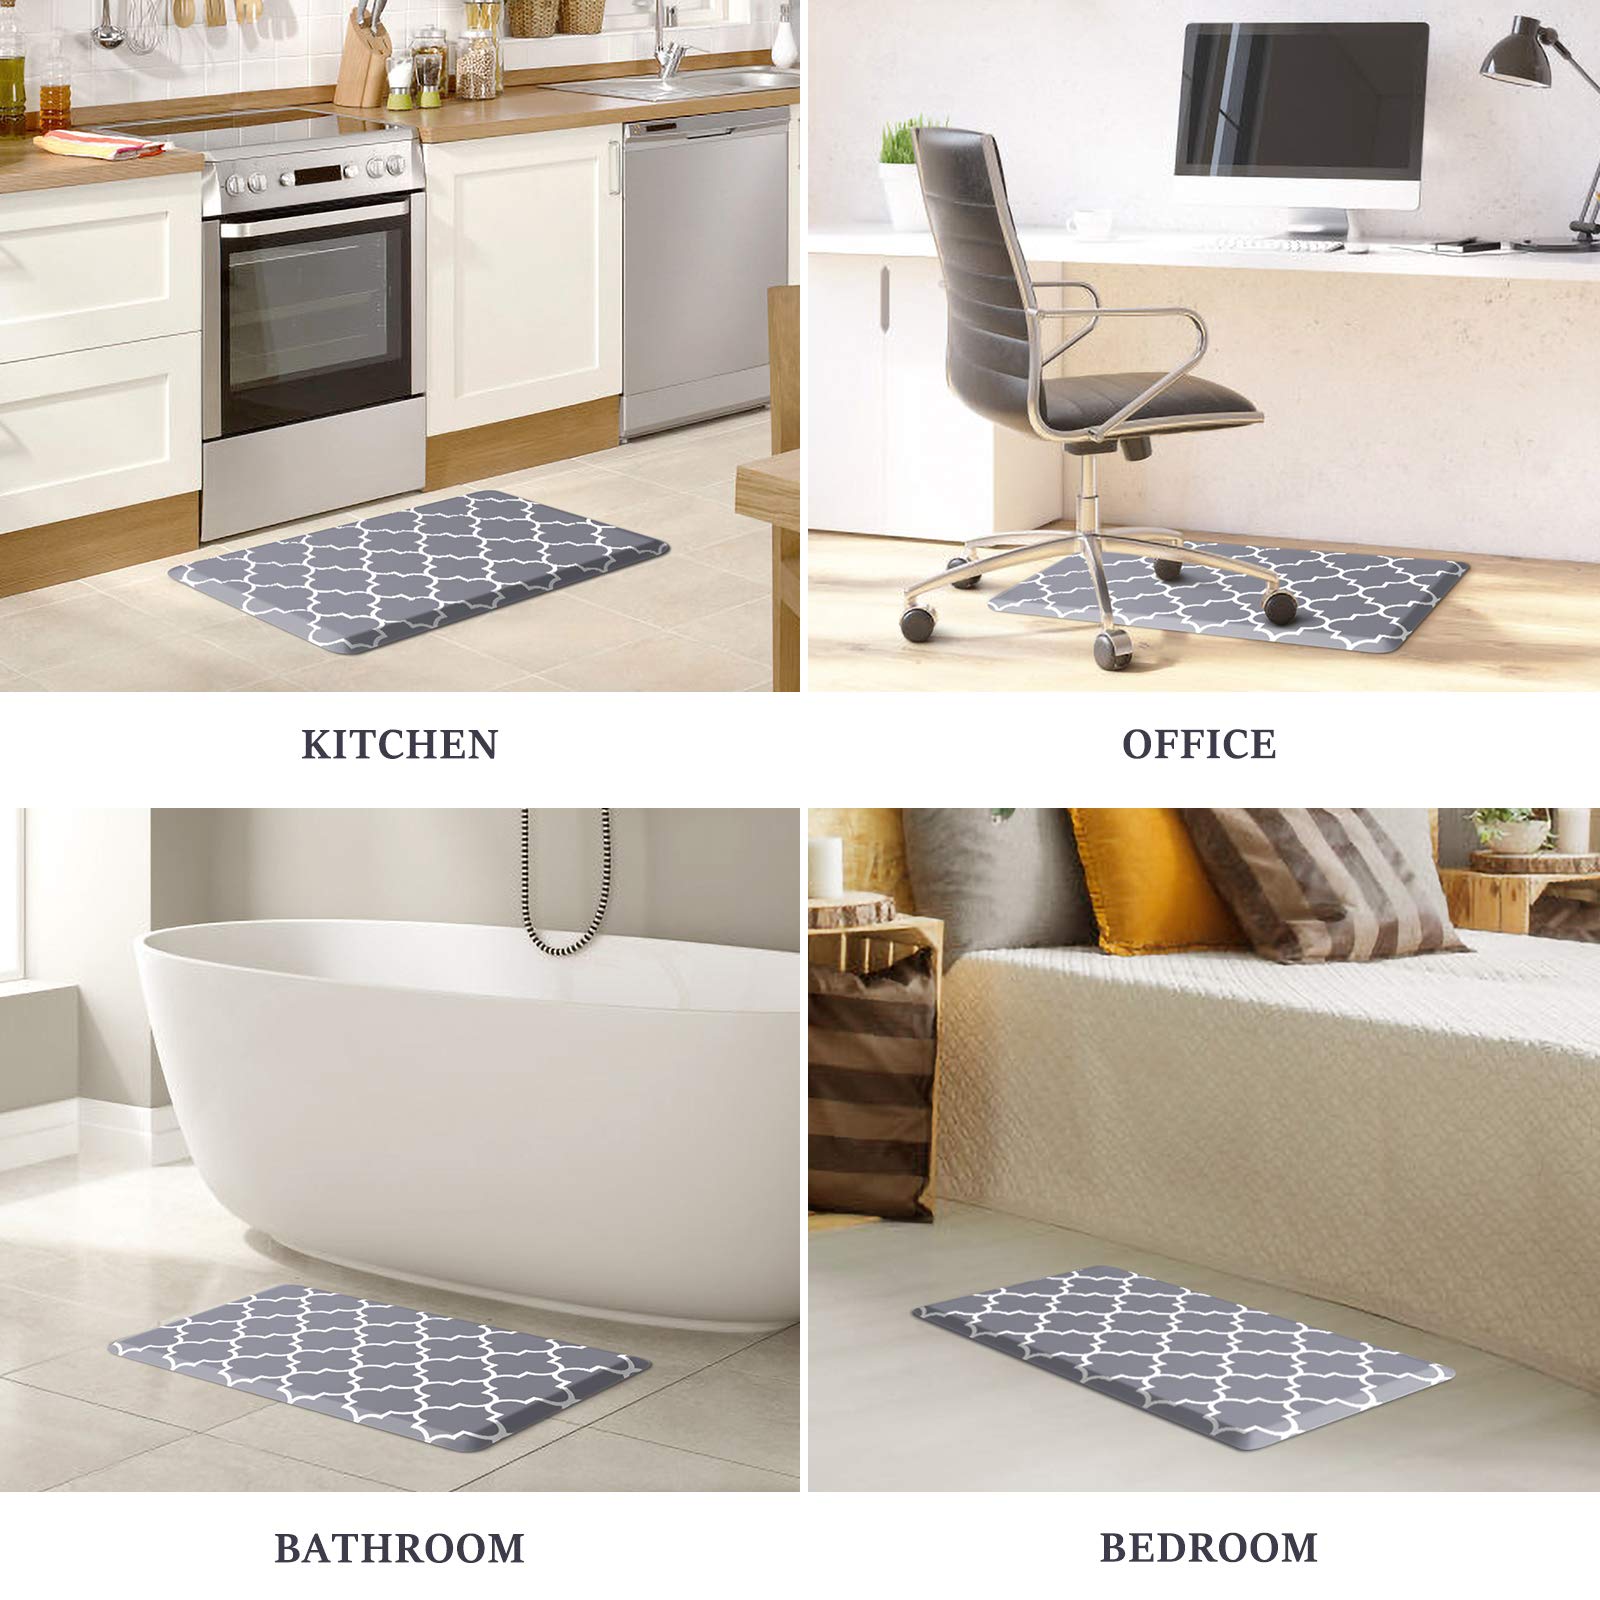 WISELIFE Kitchen Mat and Rugs Cushioned Anti-Fatigue,17.3